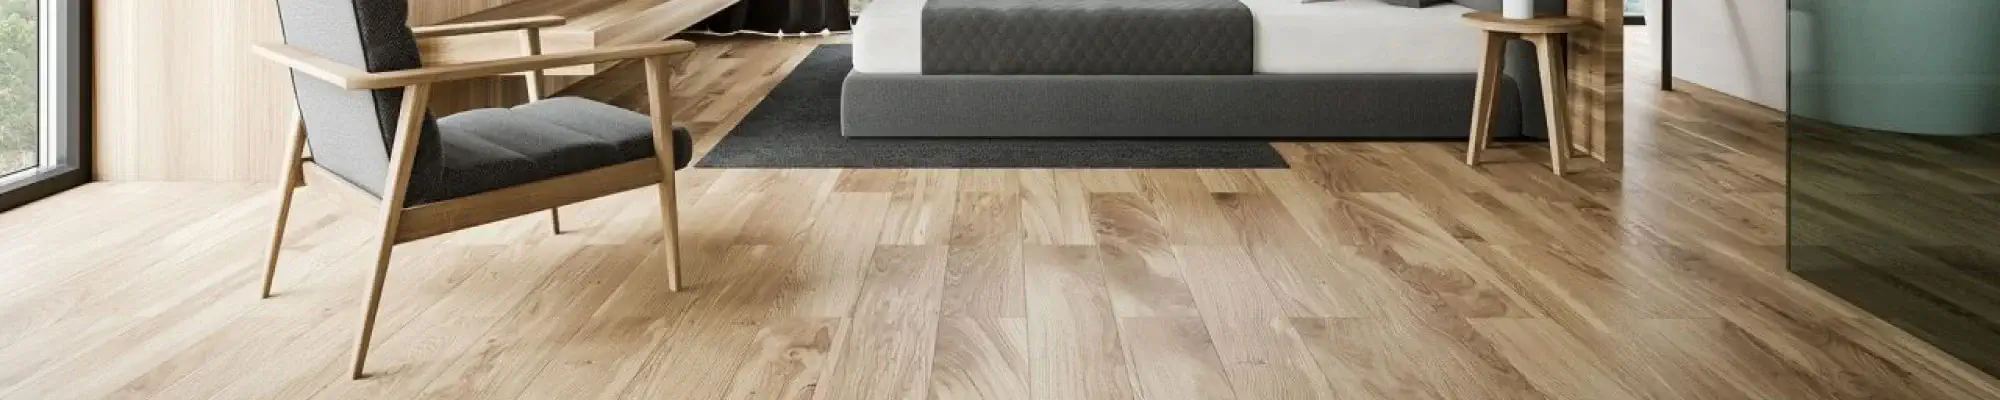 Flooring Installation services from Jason's Carpet & Tile | Margate and Port St. Lucie, FL